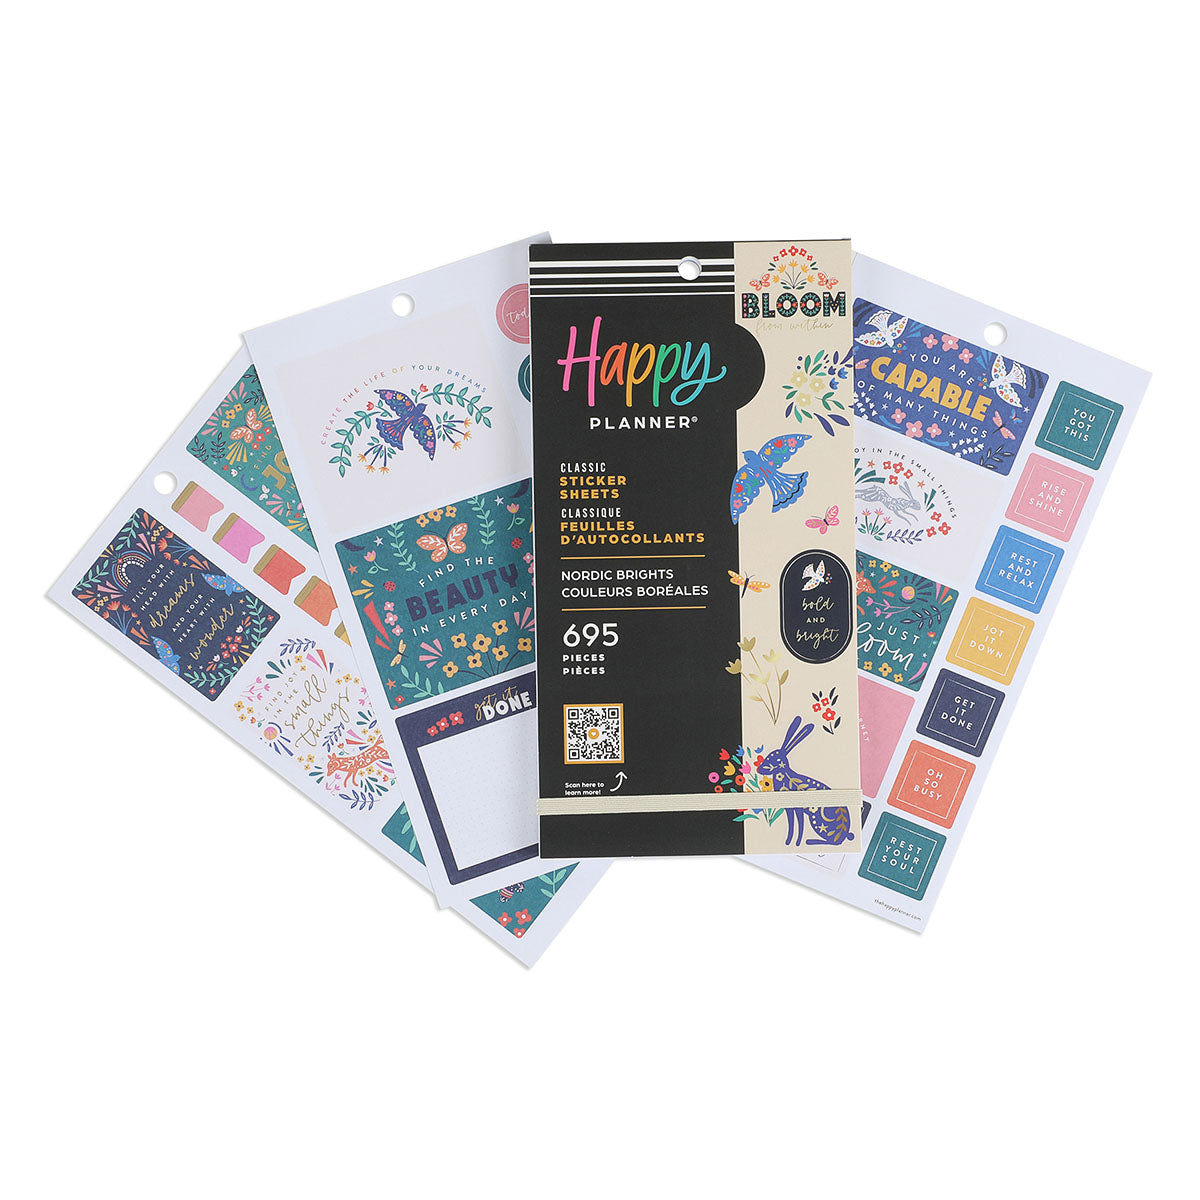 Happy Planner Nordic Brights CLASSIC Sticker Book Value Pack